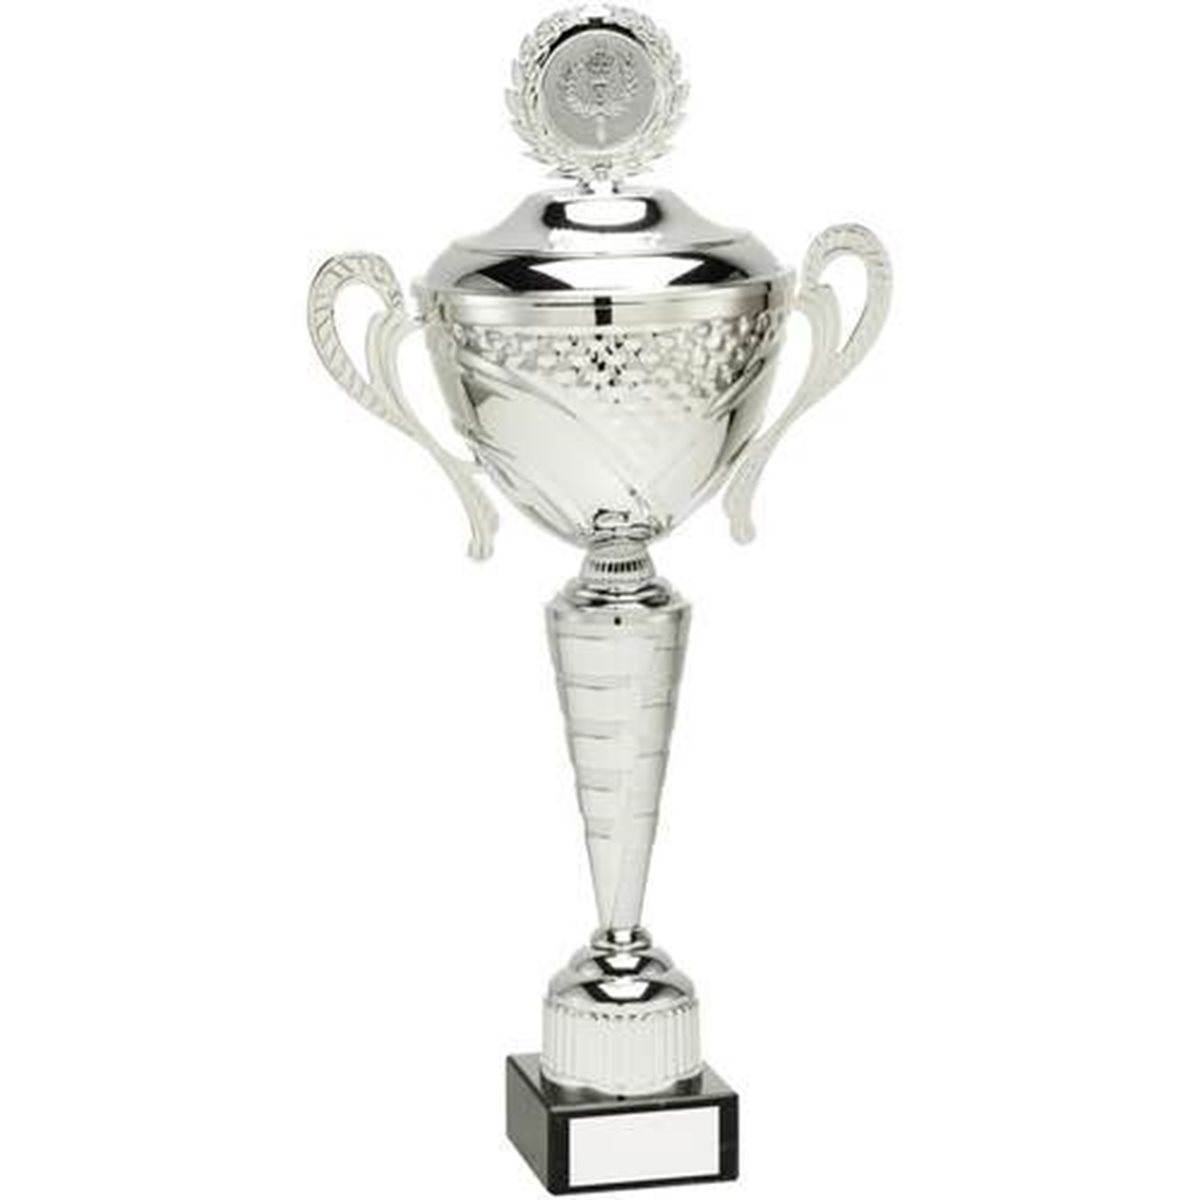 Silver Presentation Cup with Lid and Handles on Marble Base JR22-AT30